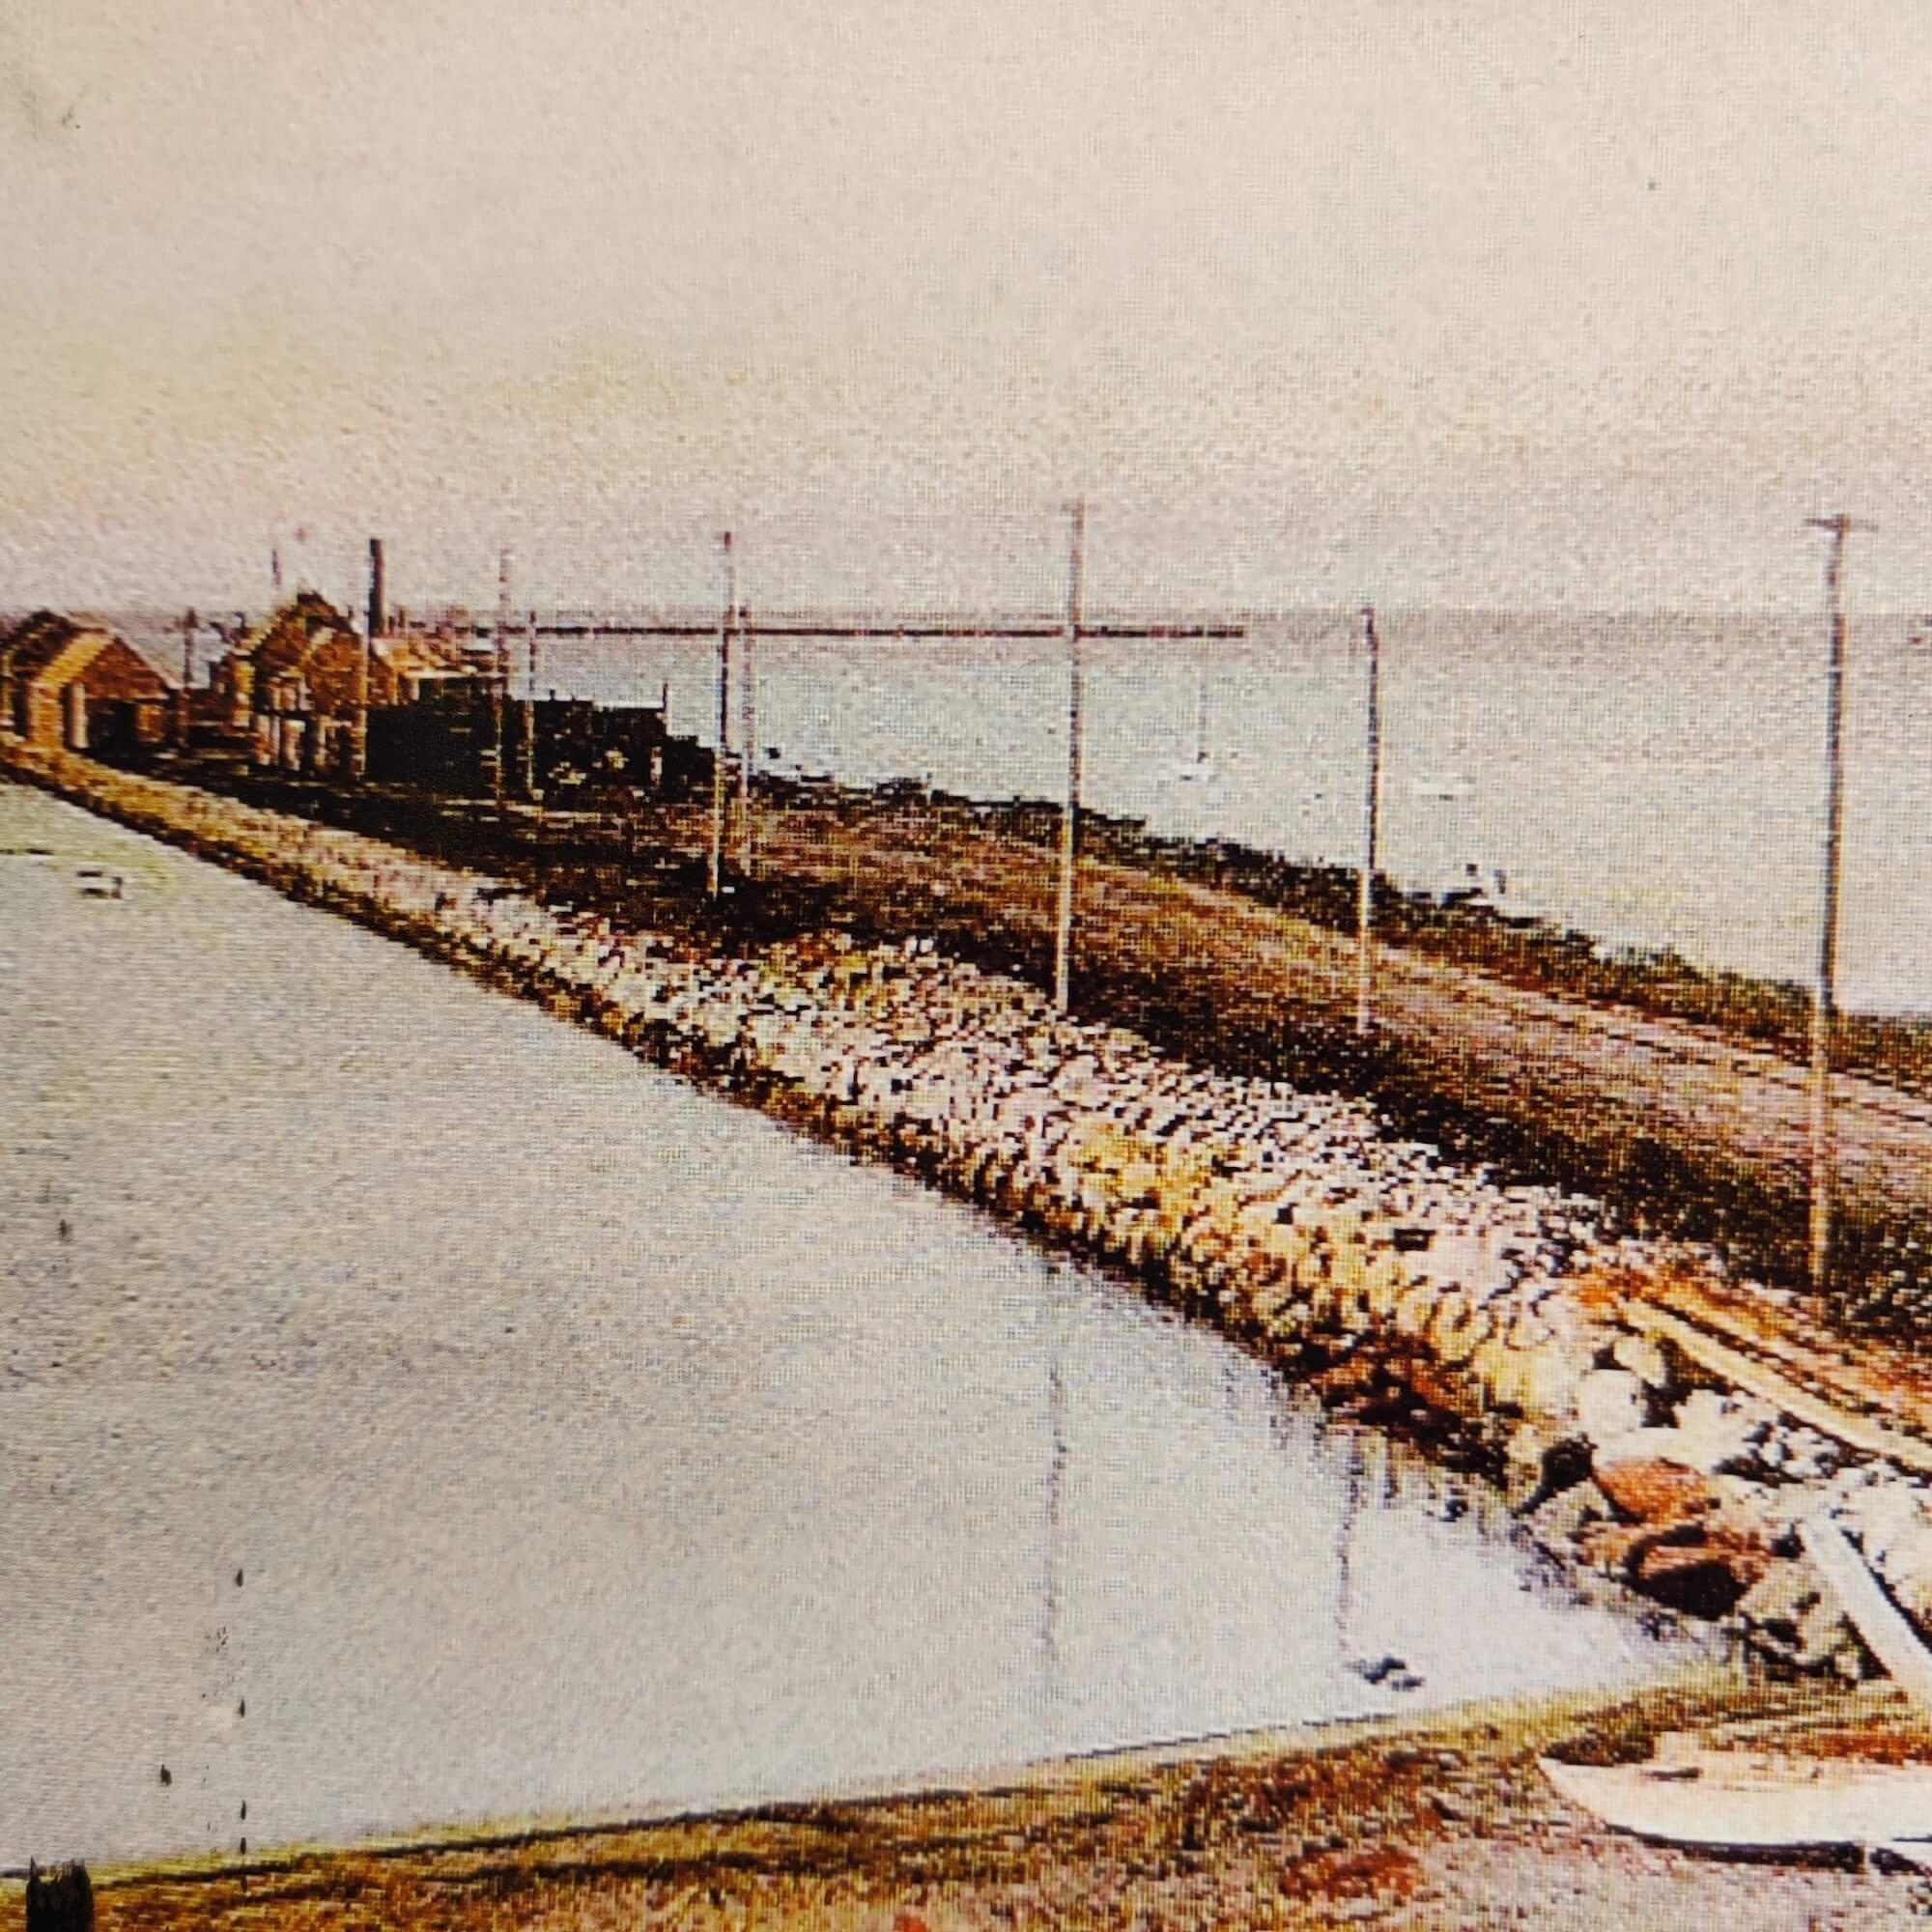  Prior to the Railroad Wharf in Hyannis Port, the nearest port for ships traveling to and from Nantucket was New Bedford, 80 nautical miles away. With the arrival of the Old Colony Railroad in the village of Hyannis, it made sense to extend the track